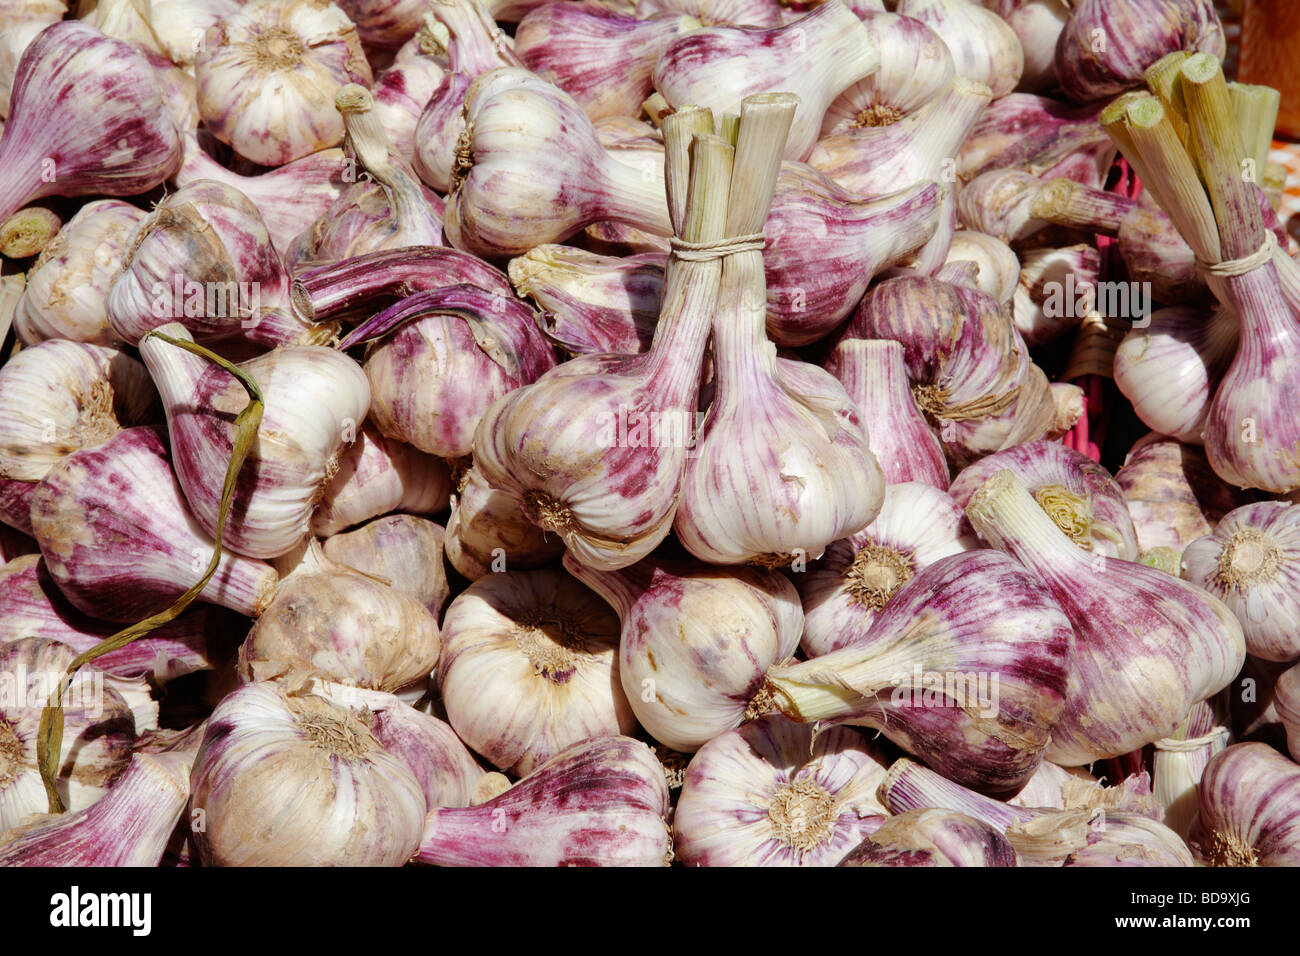 tight shot of garlic for sale on a market stall Stock Photo